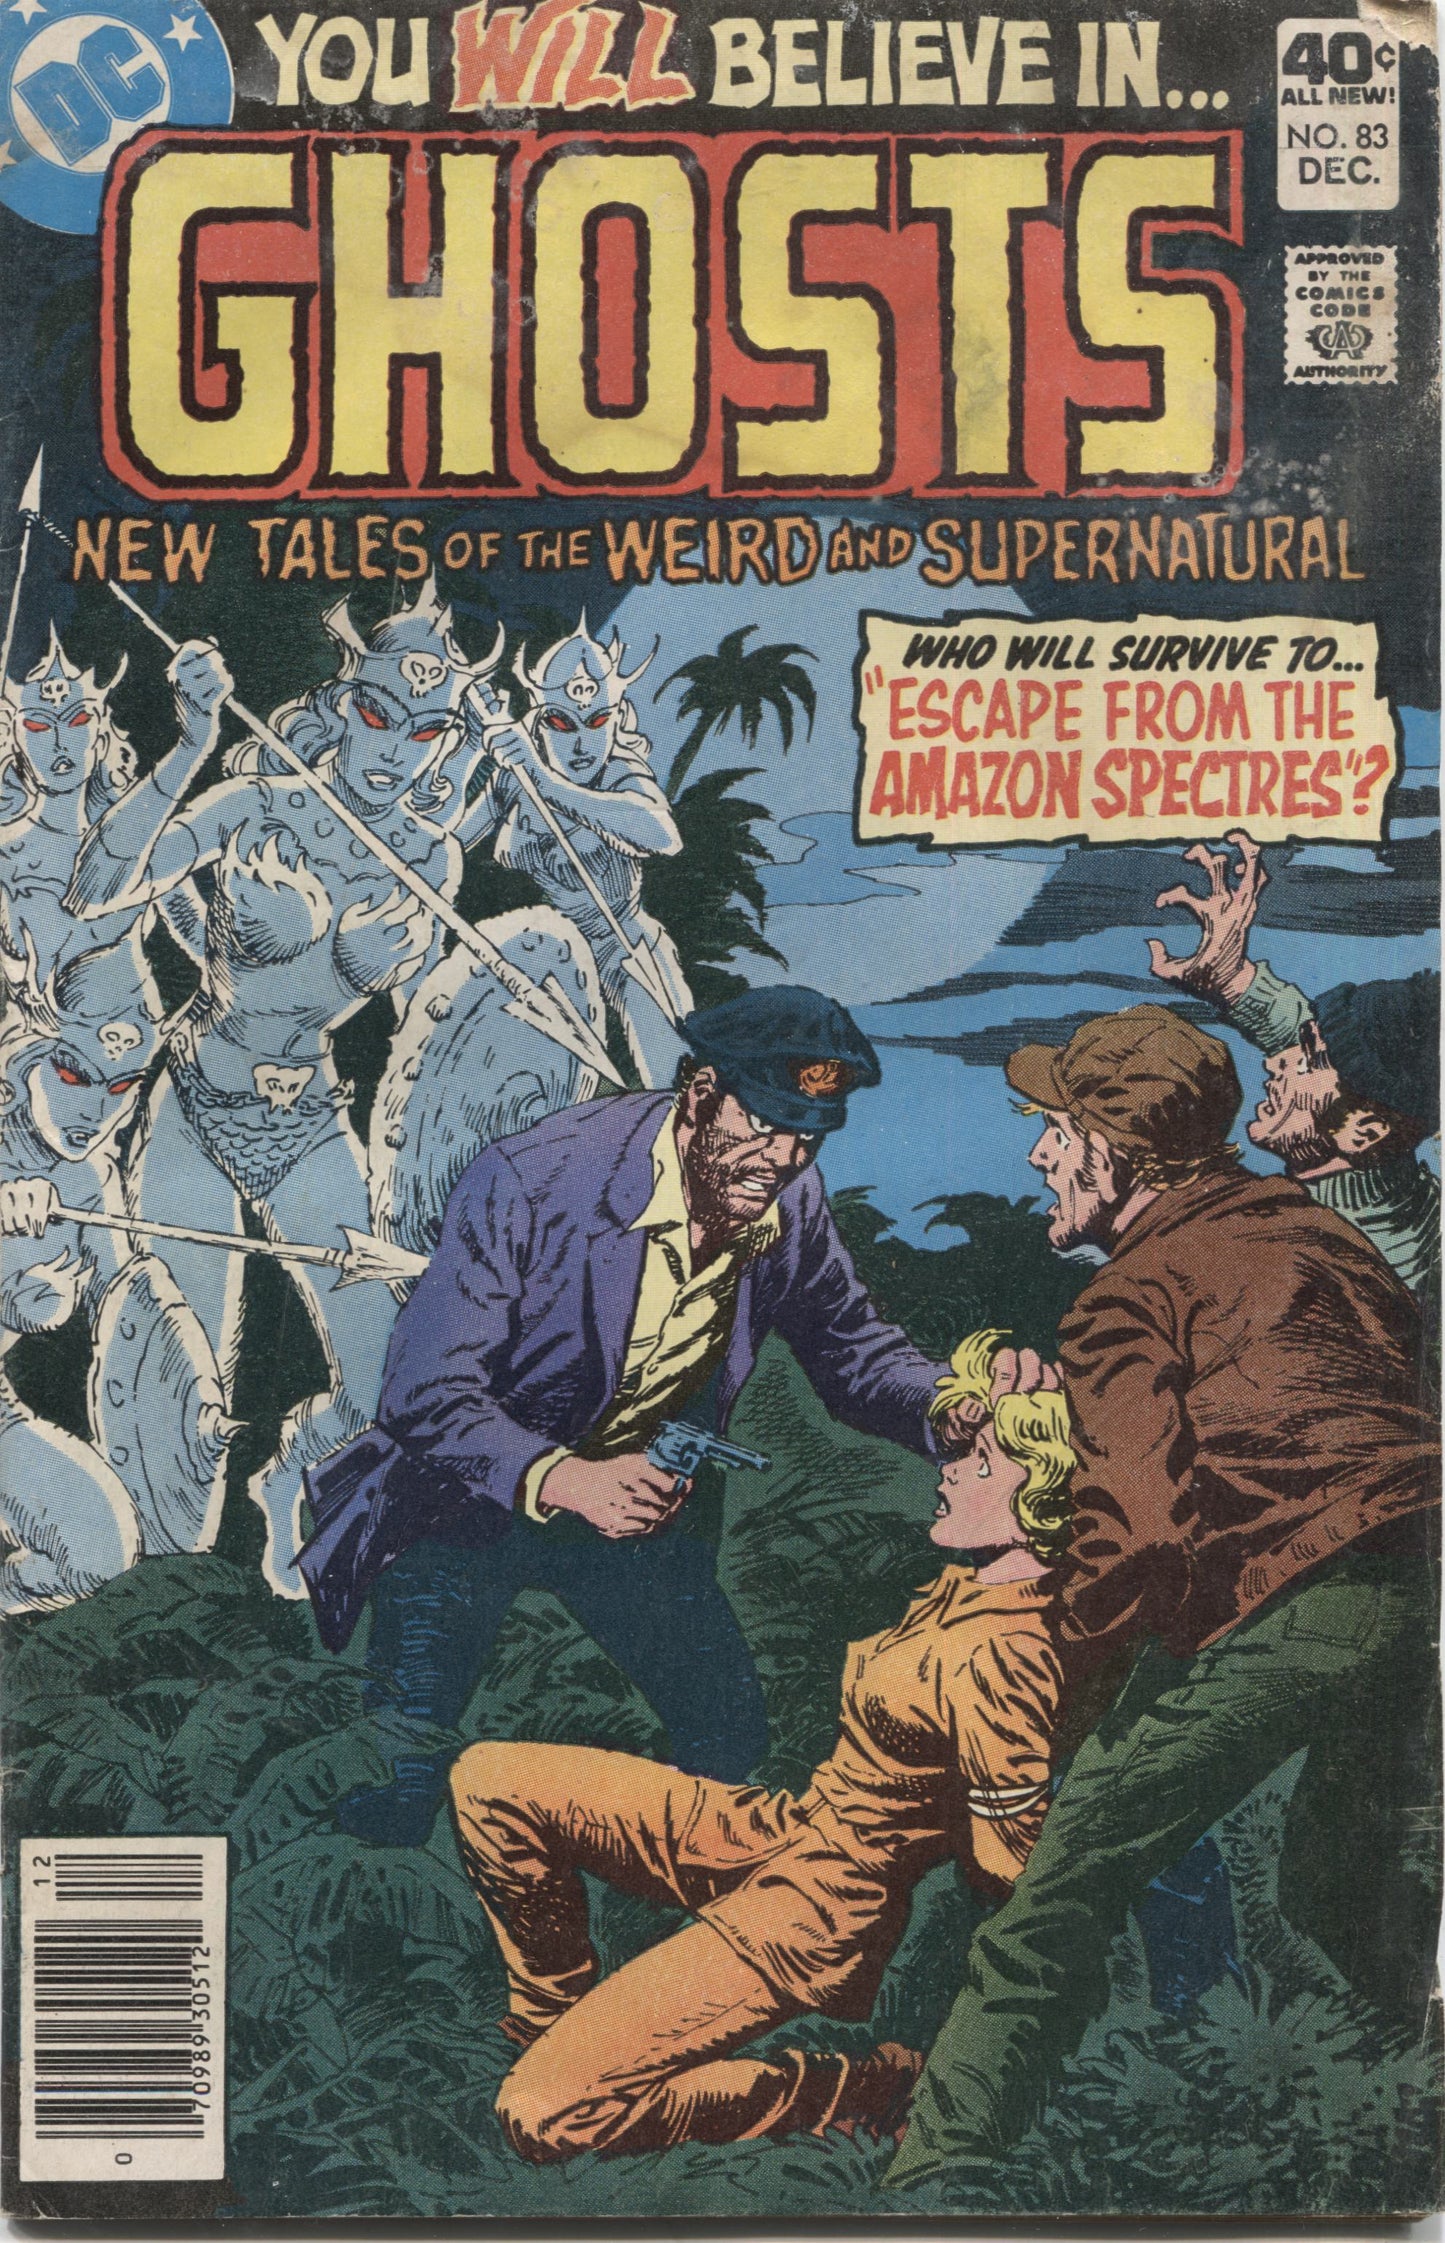 Ghosts No. 82, "Escape from the Amazon Spectres," DC Comics, December 1979